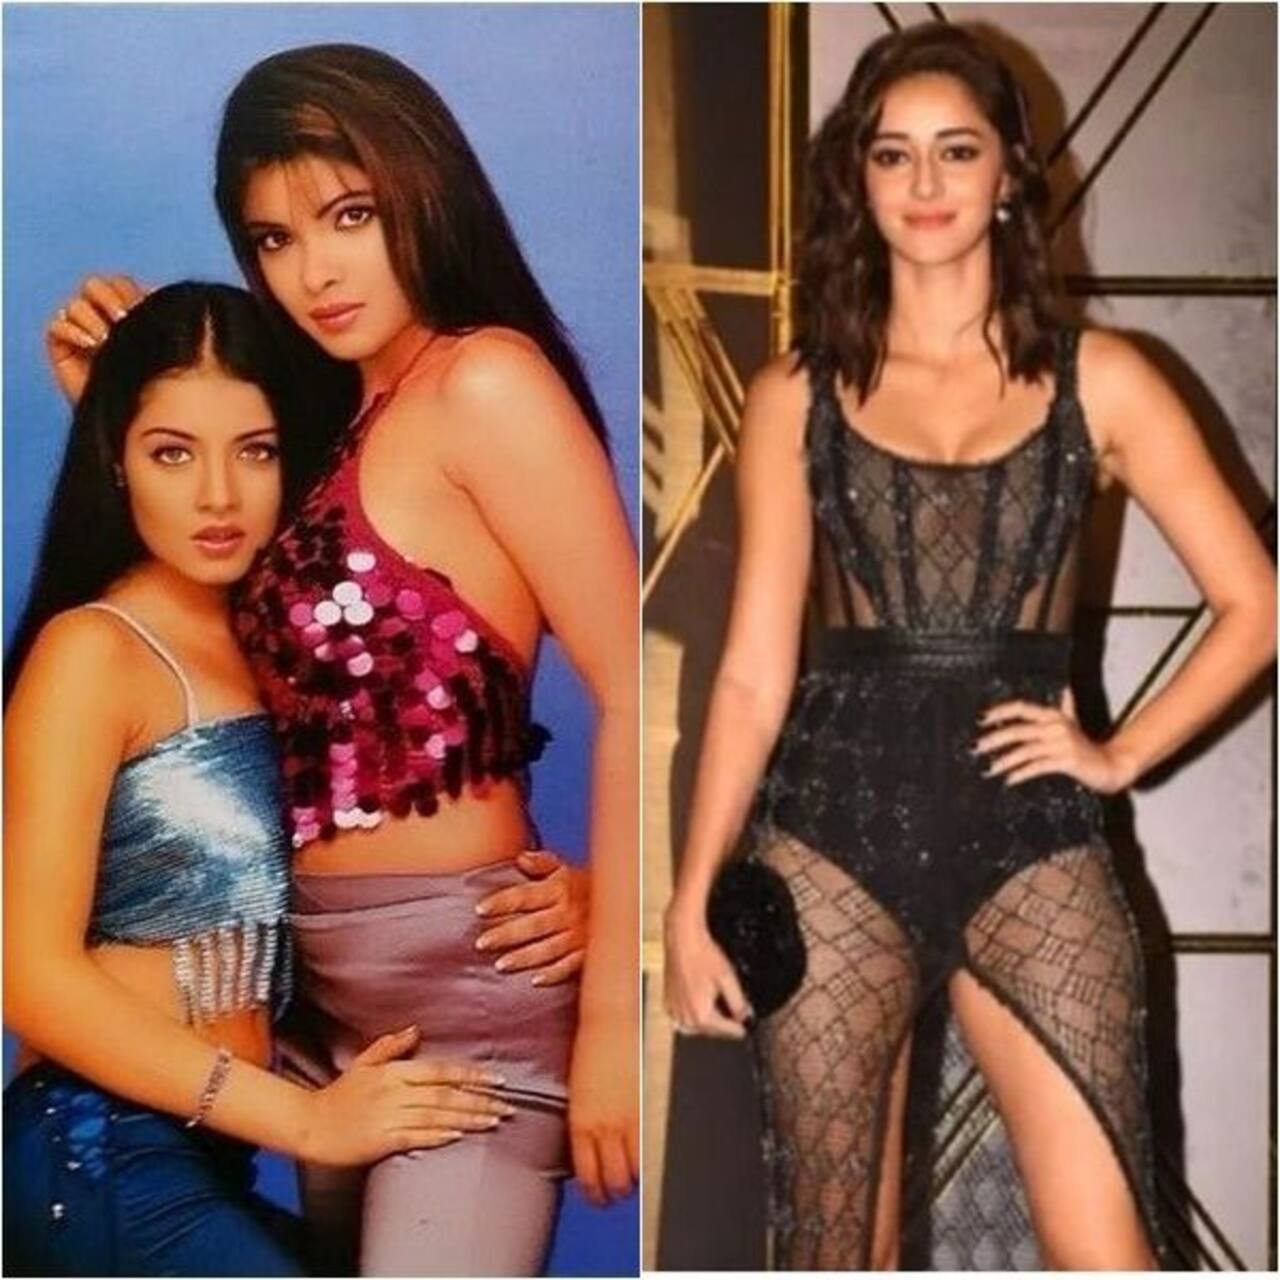 Trending Entertainment News Today: Celina Jaitly's awkward TB picture with Priyanka Chopra goes viral; Chunky Panday REACTS to Ananya Panday's trolling and more